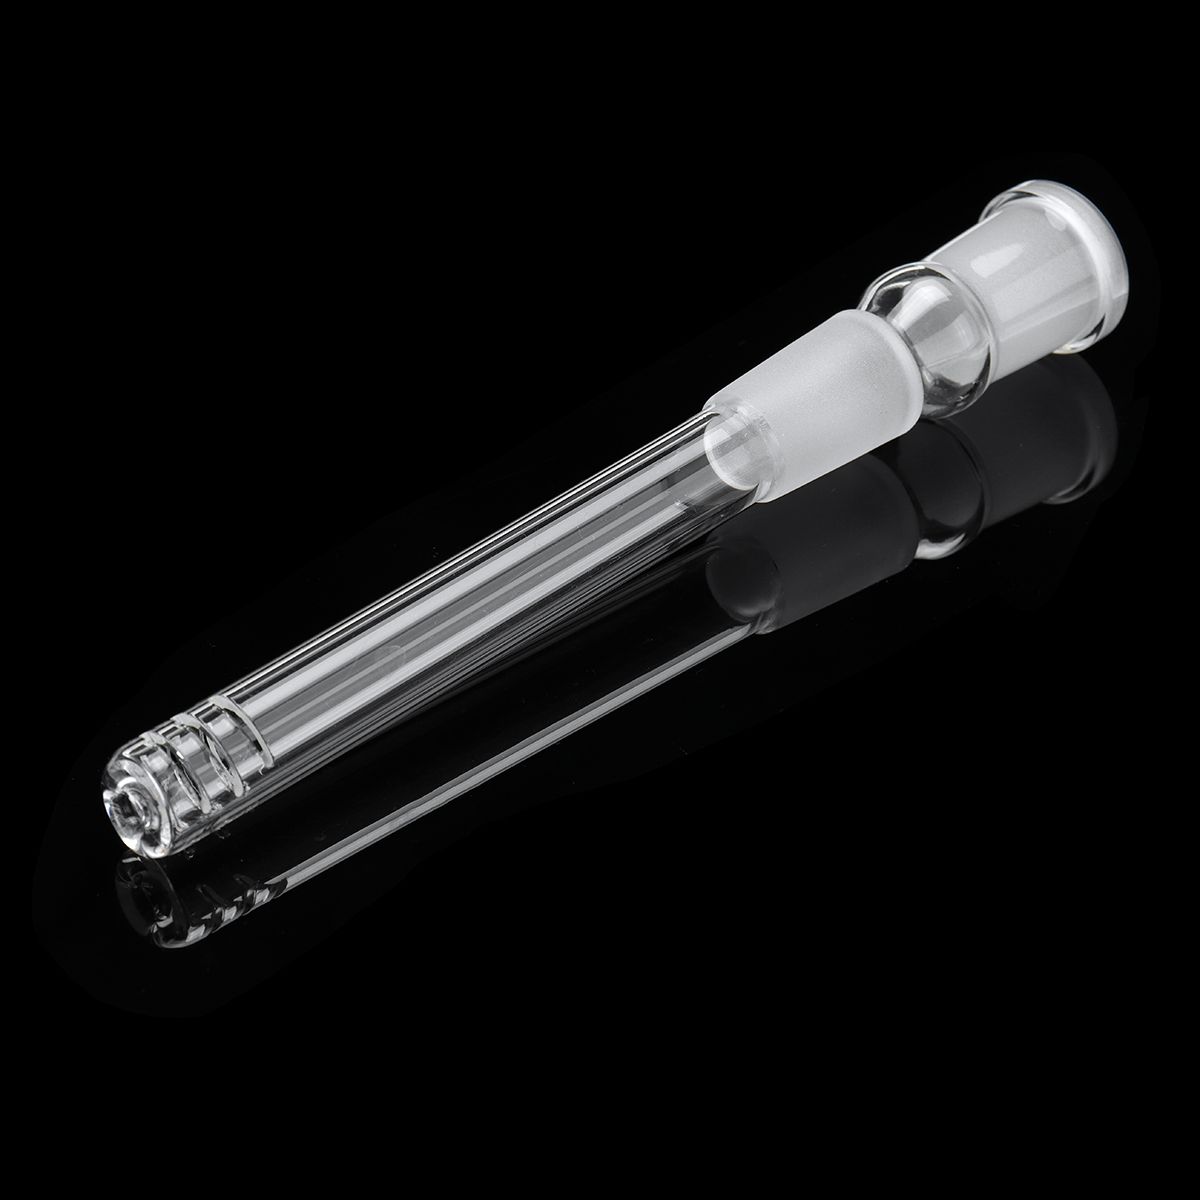 34-Inches-Transparent-Filter-Pipe-Tube-Adapter-Downstem-18mm-Male-to-14mm-Female-Banger-1523800